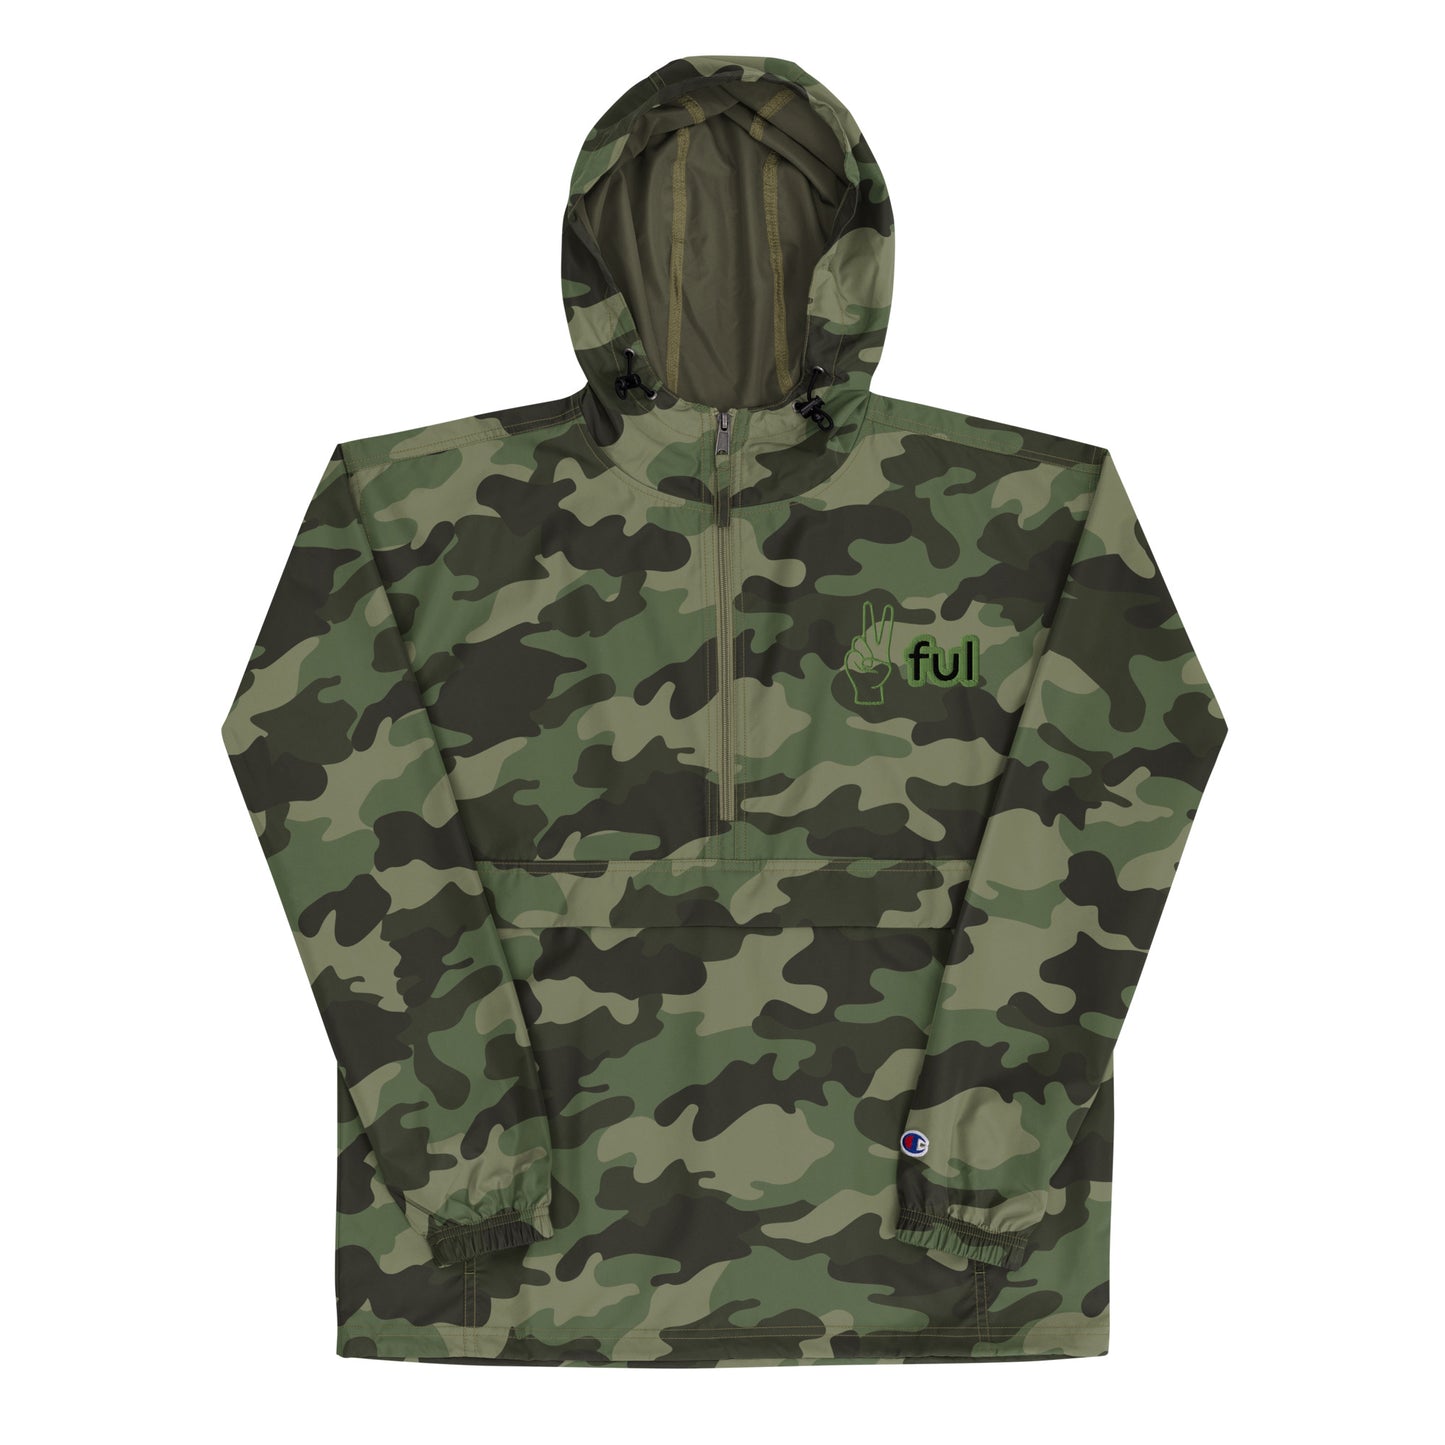 Unisex Black Camo Green Champion Packable Jacket, Long sleeve, Peaceful embroidered  S-2XL